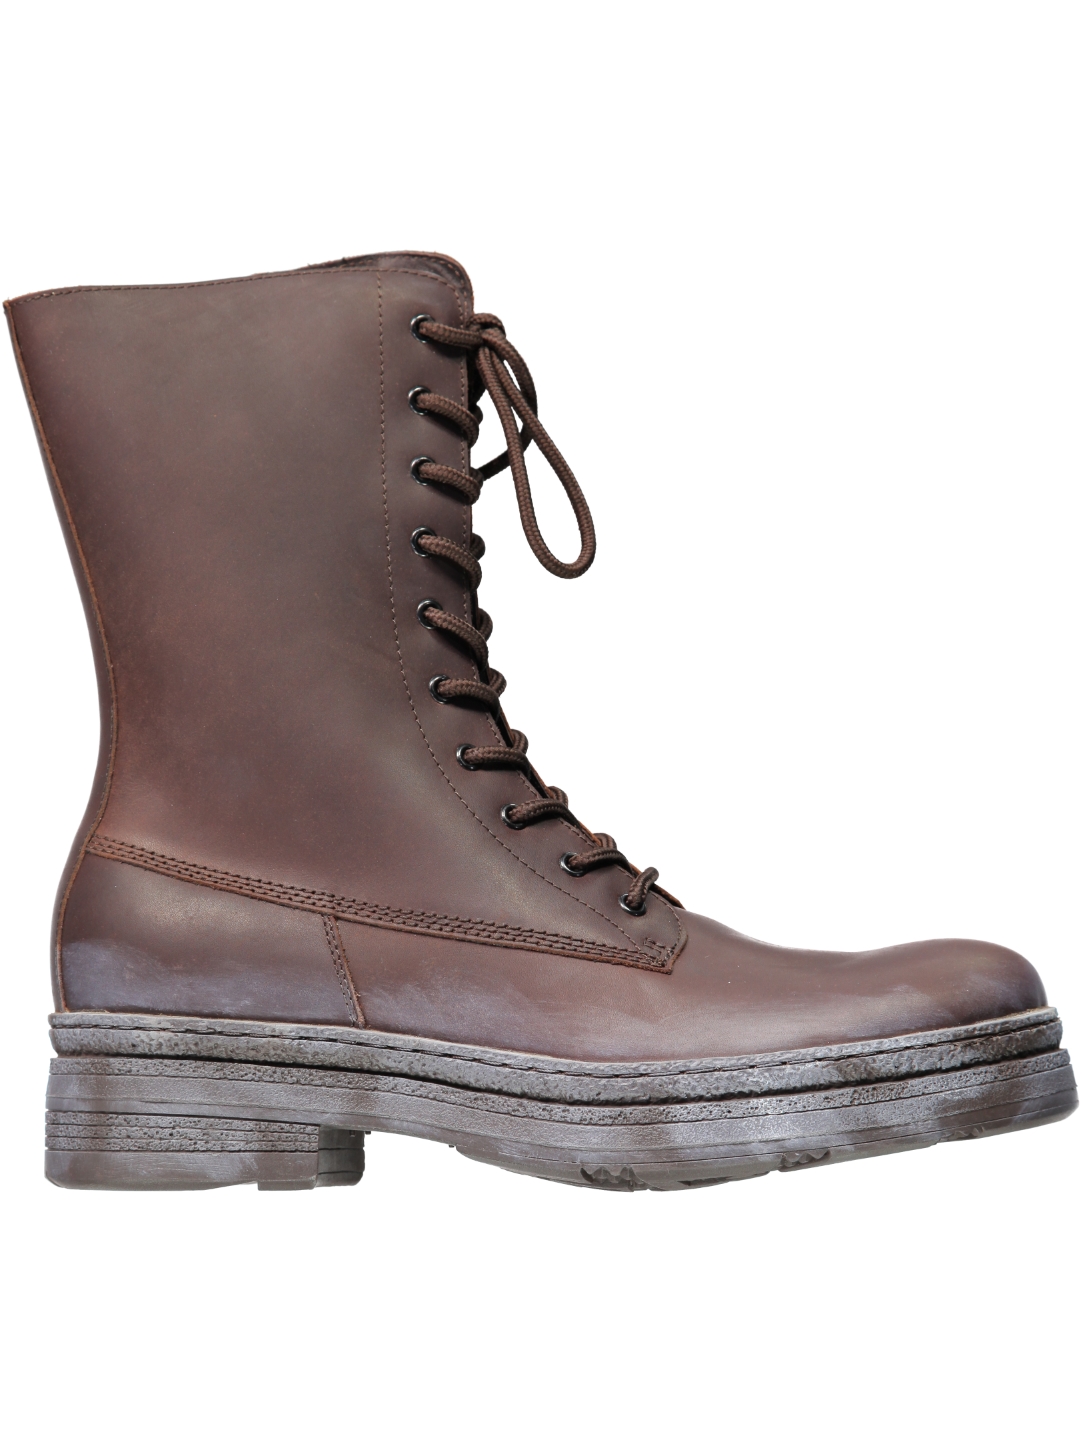 Yohji yamamoto Mens Leather Engineer Boots in Brown for Men | Lyst